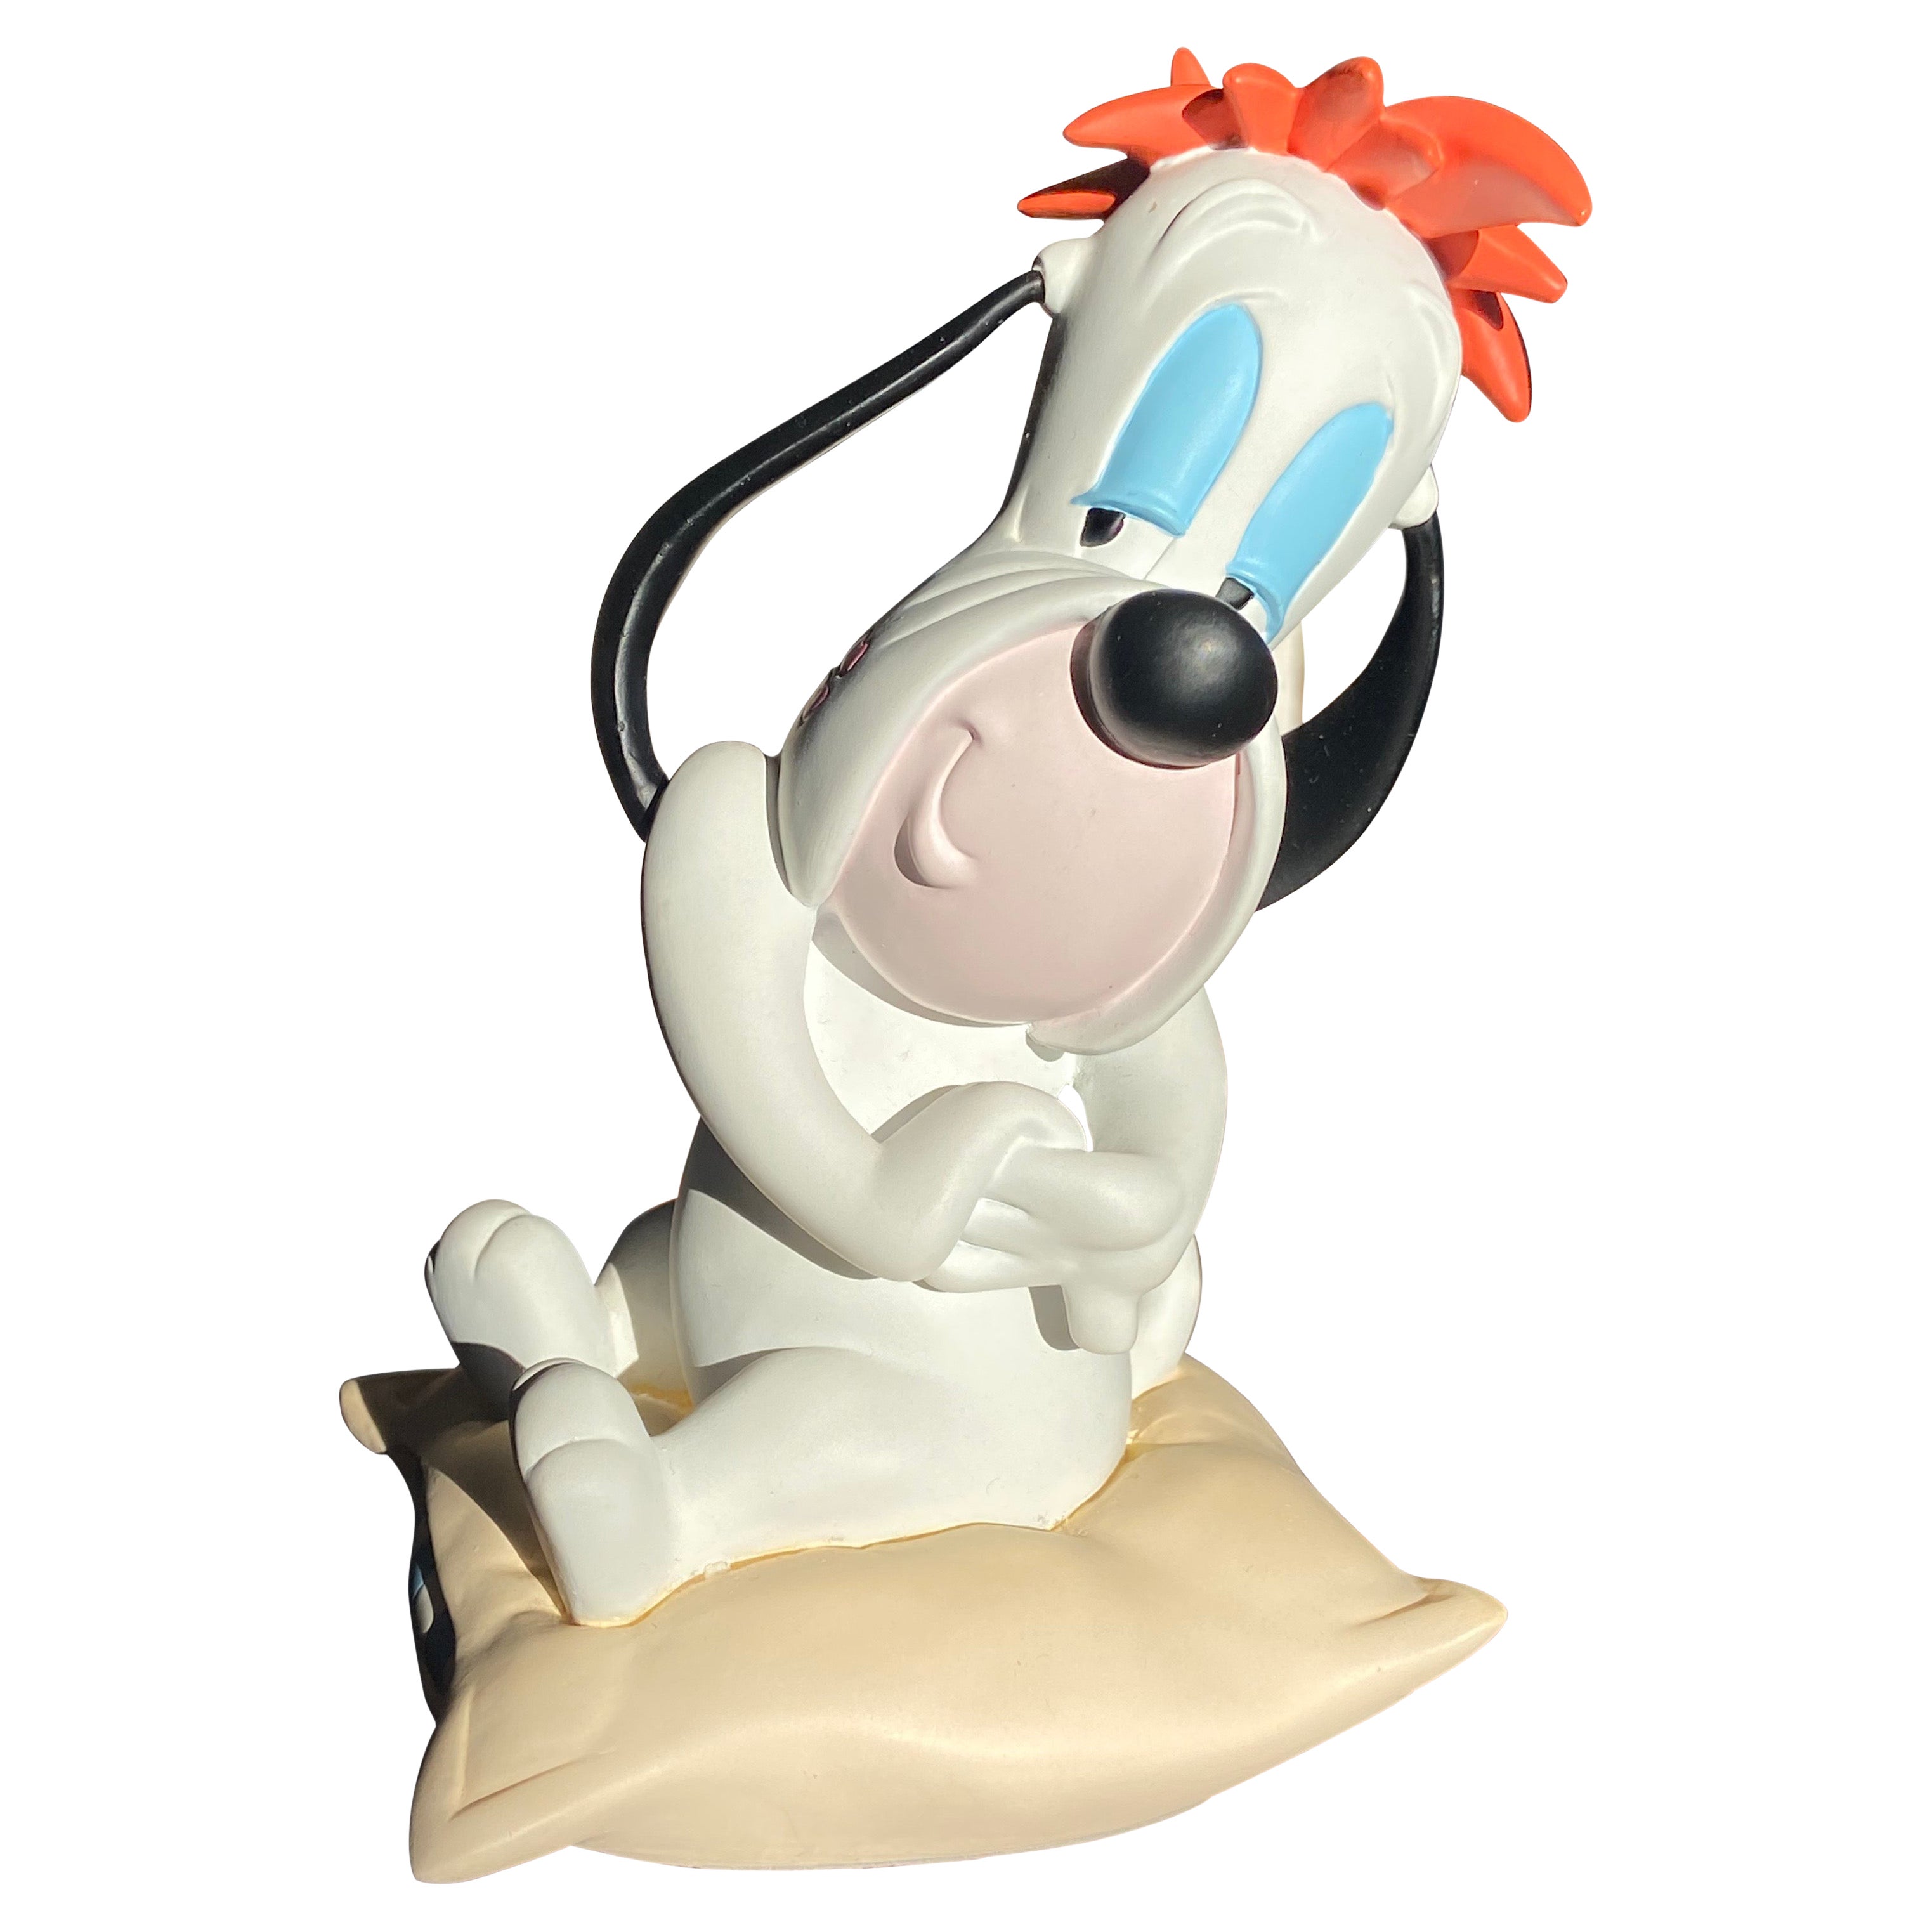 Rare and Collectable Droopy on a Cushion by Demons & Merveilles Figurine Statue